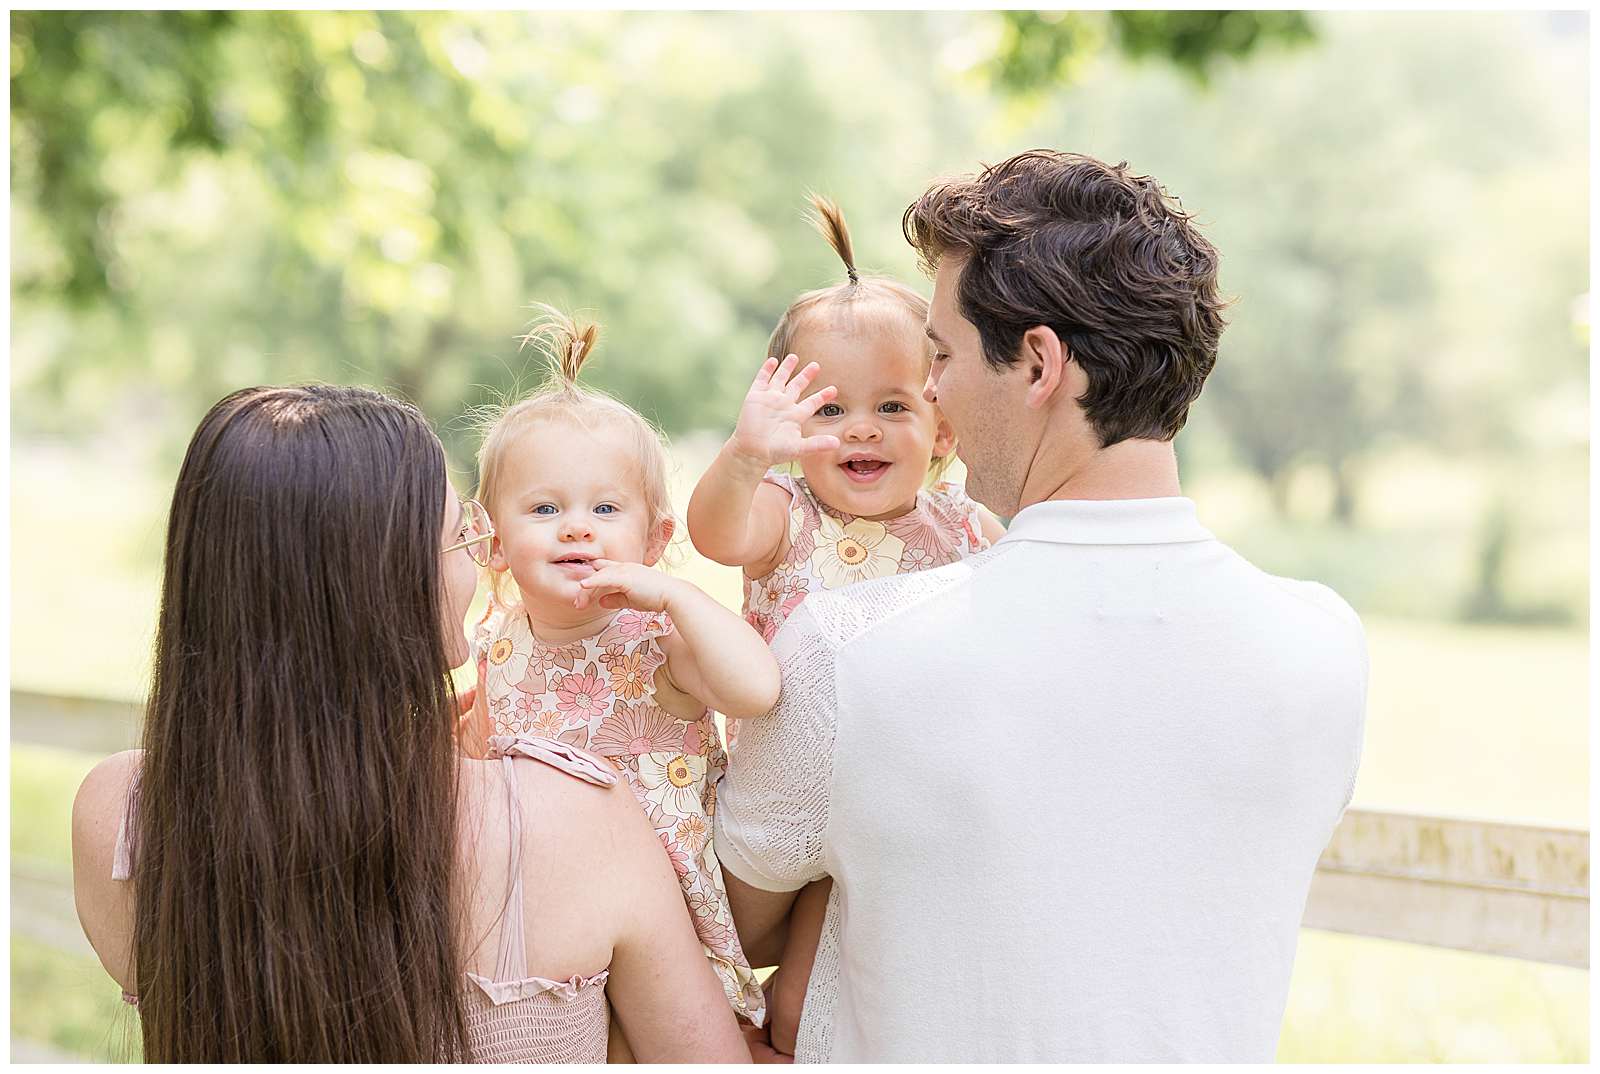 One year old twin girls look over the shoulder of their parents at Rebecca Rice who is capturing their Nashville session for her photography education membership. Click to see more of this family and watch Rebecca behind the scenes! -rebeccaricephoto.com